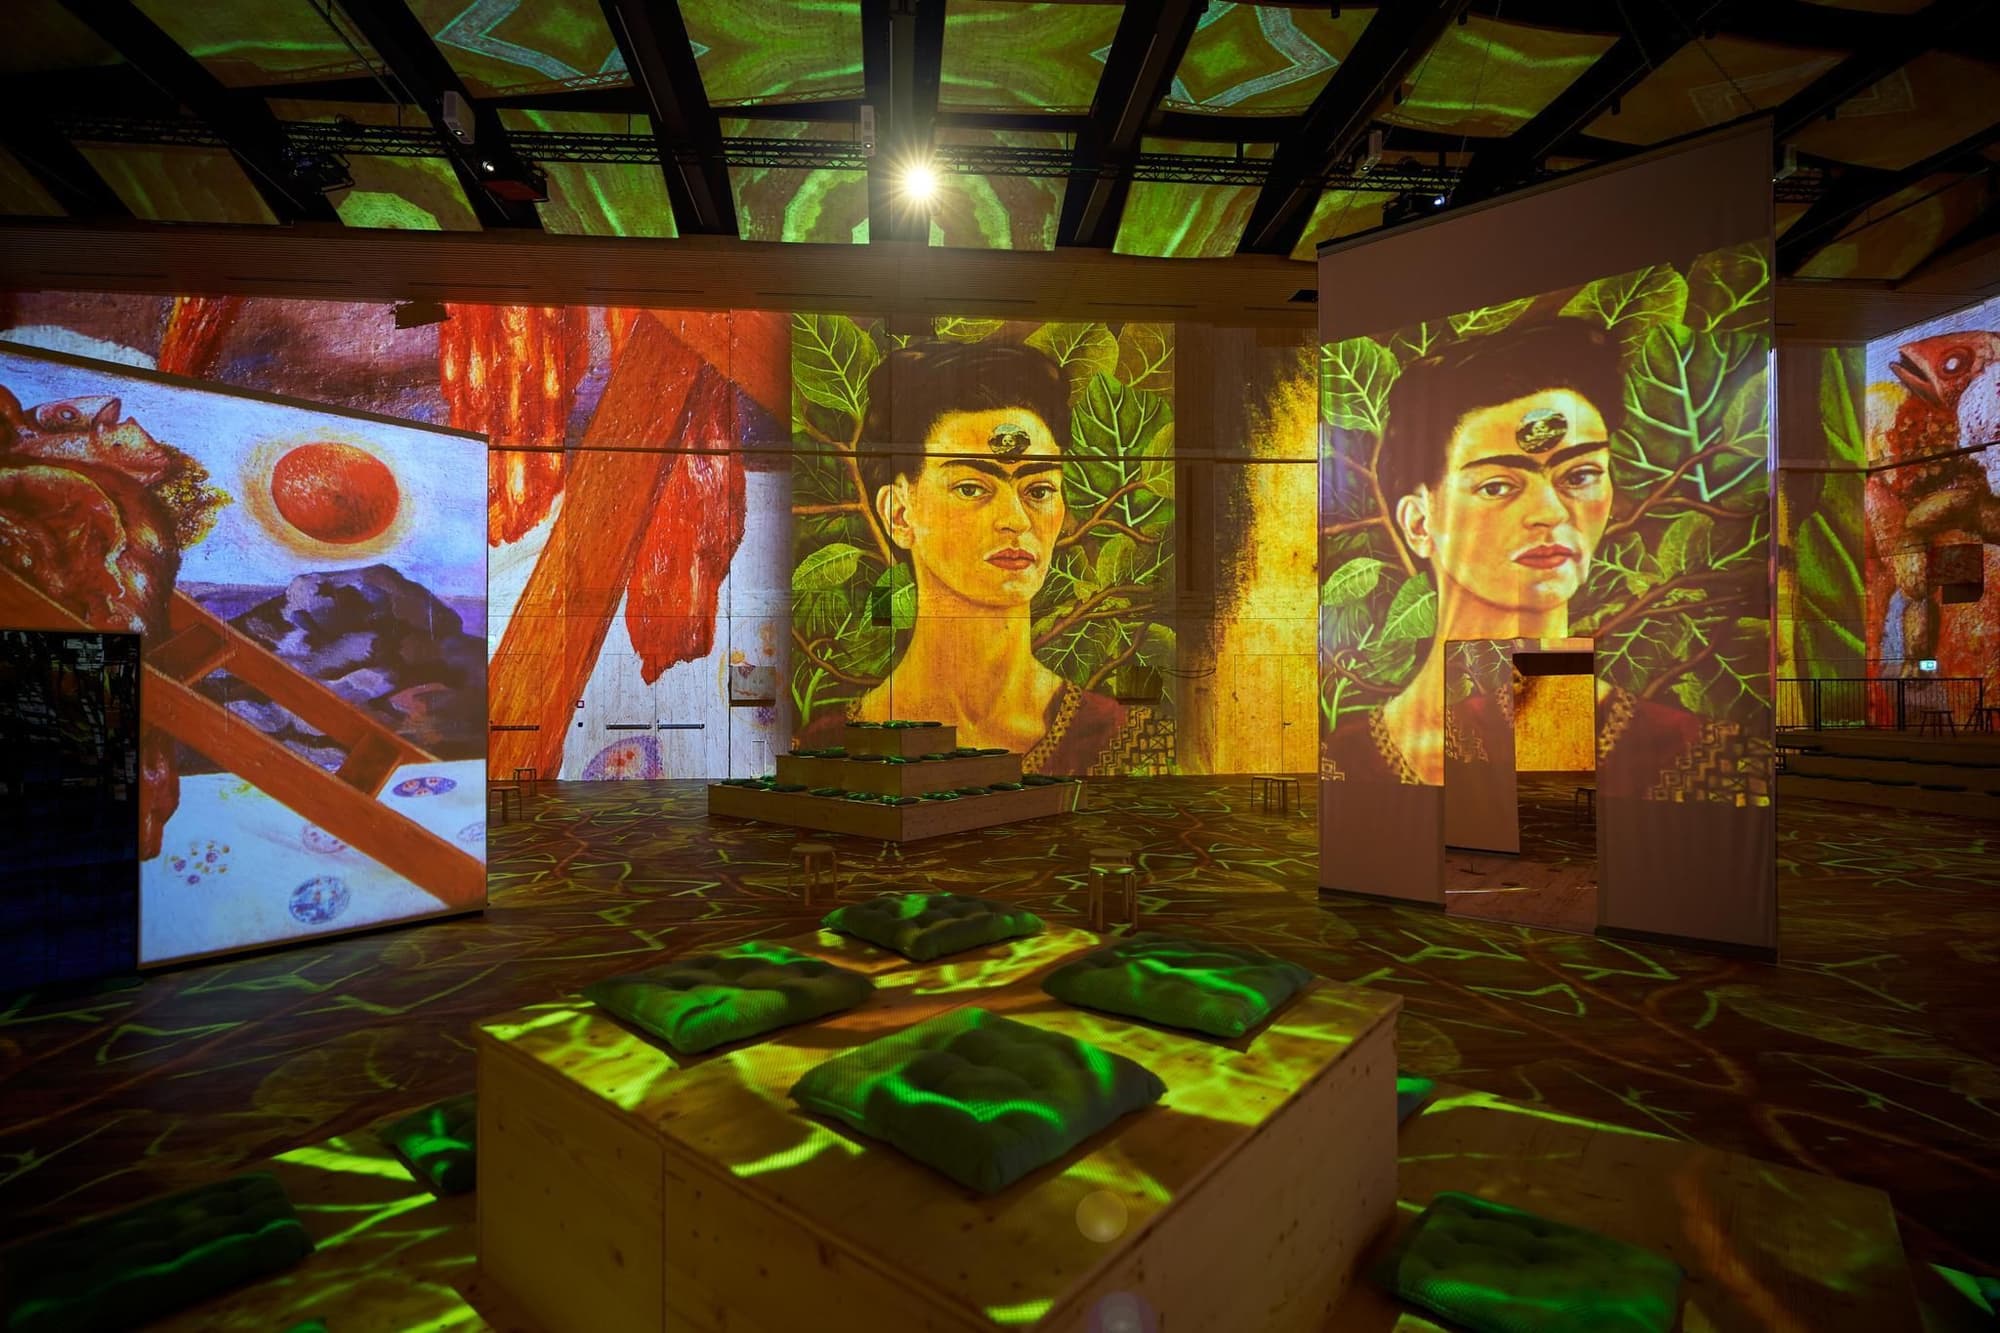 Frida Kahlo's surreal artwork is displayed in 360 degrees as part of Lighthouse Immersive's new 